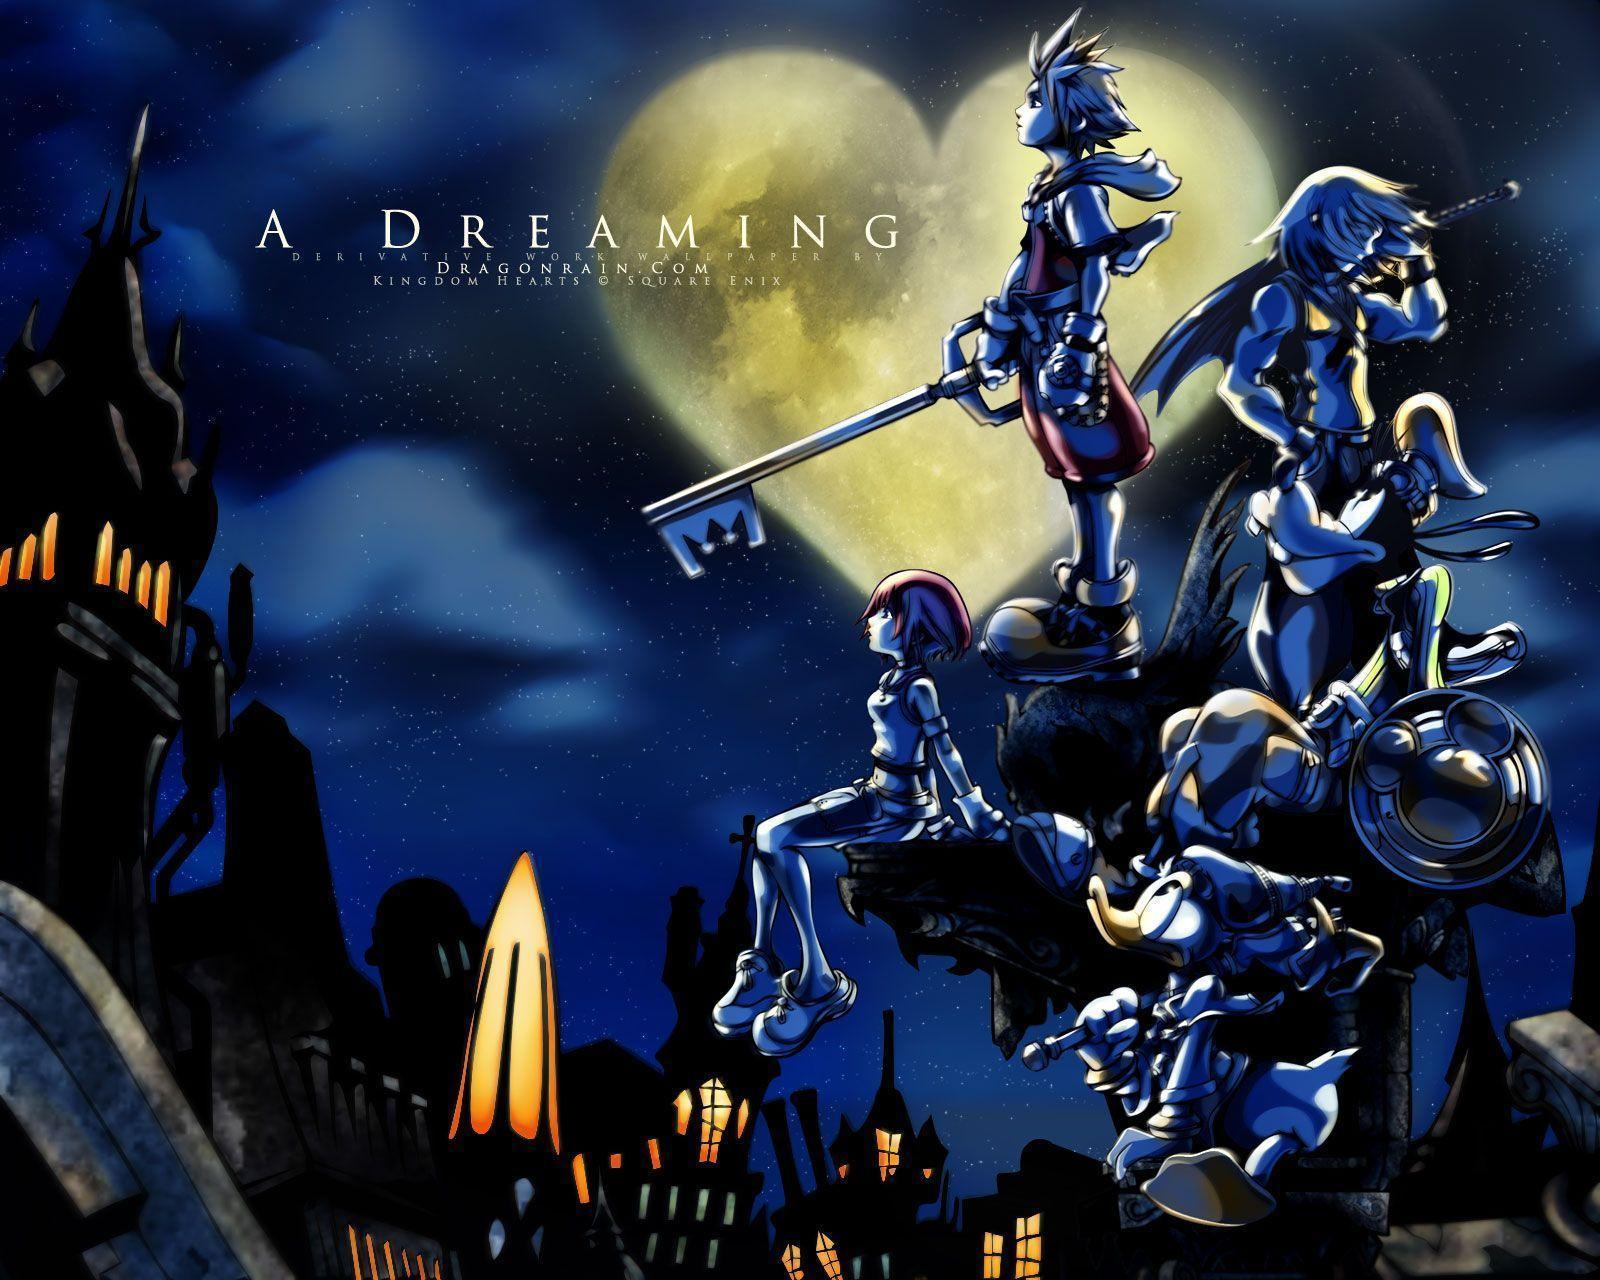 Kingdom Hearts Wallpaper and Background